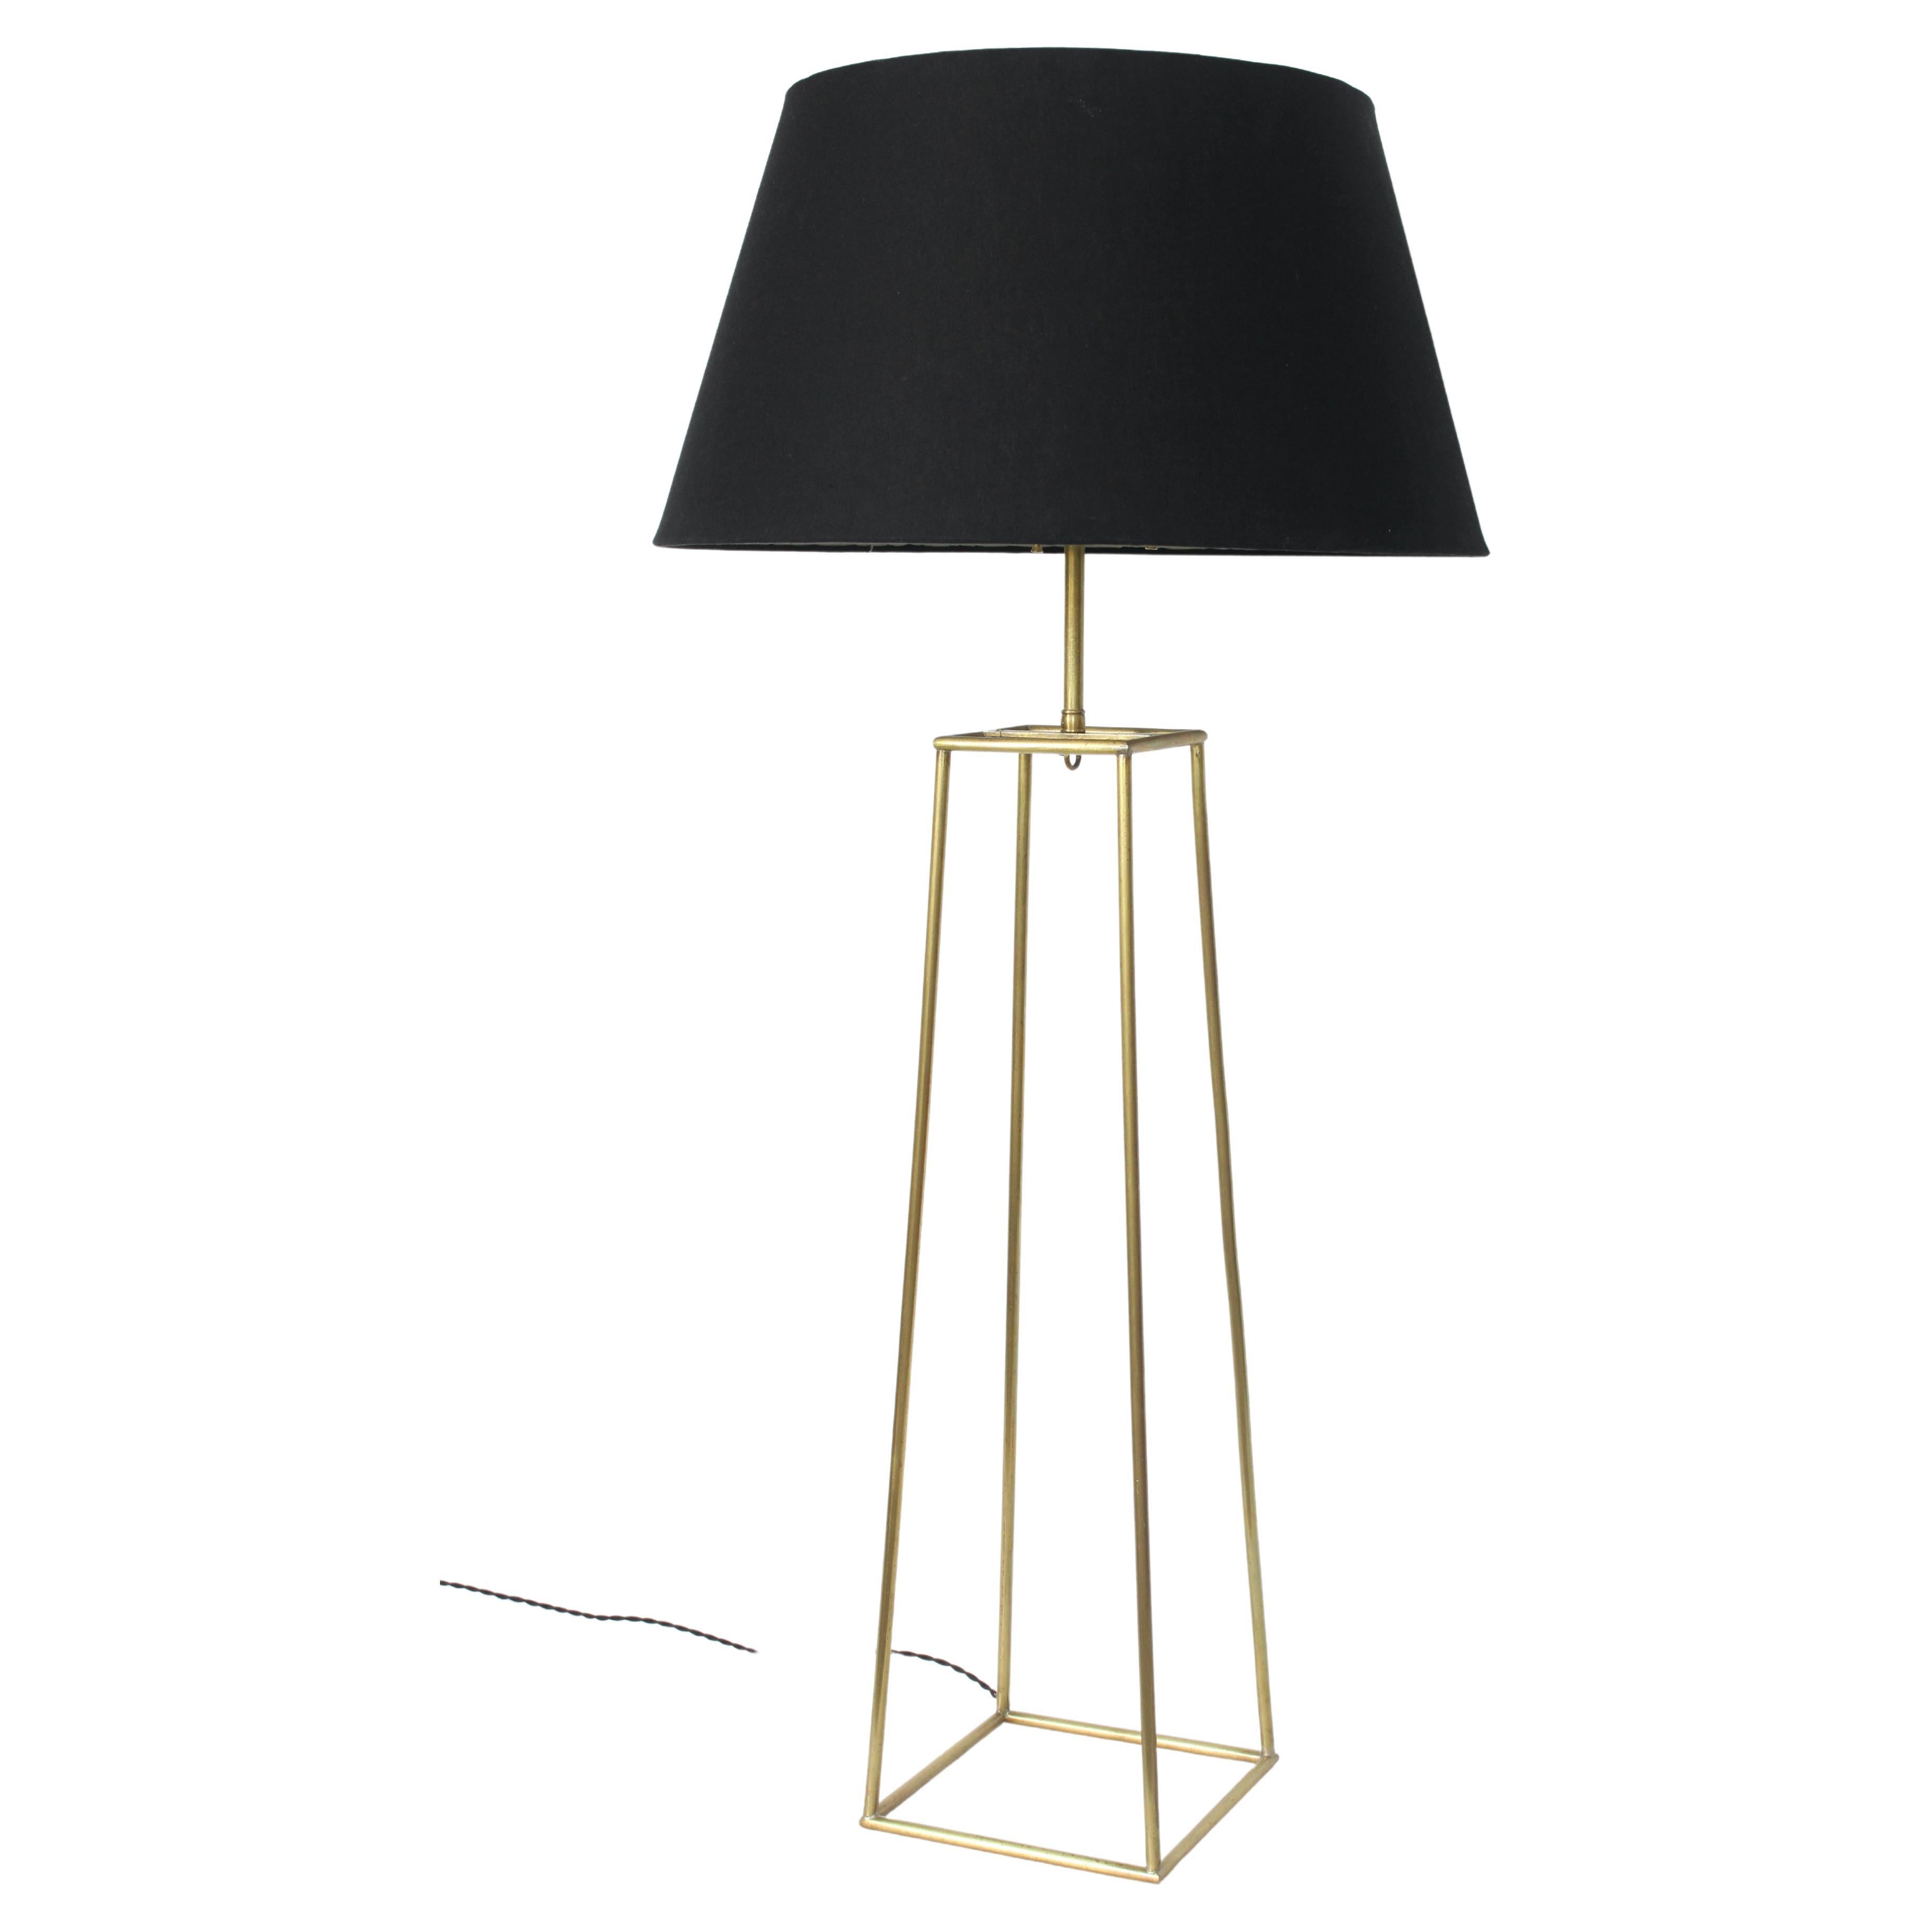 Tall Tommi Parzinger, Harry Lawenda style tapered box form brass lamp. Featuring a large, sturdy, angled four sided open box Brass framework, rewired with black braided cloth cord. Top of box (5W x 5D). Bottom of box (8Wx 8D). Standard double